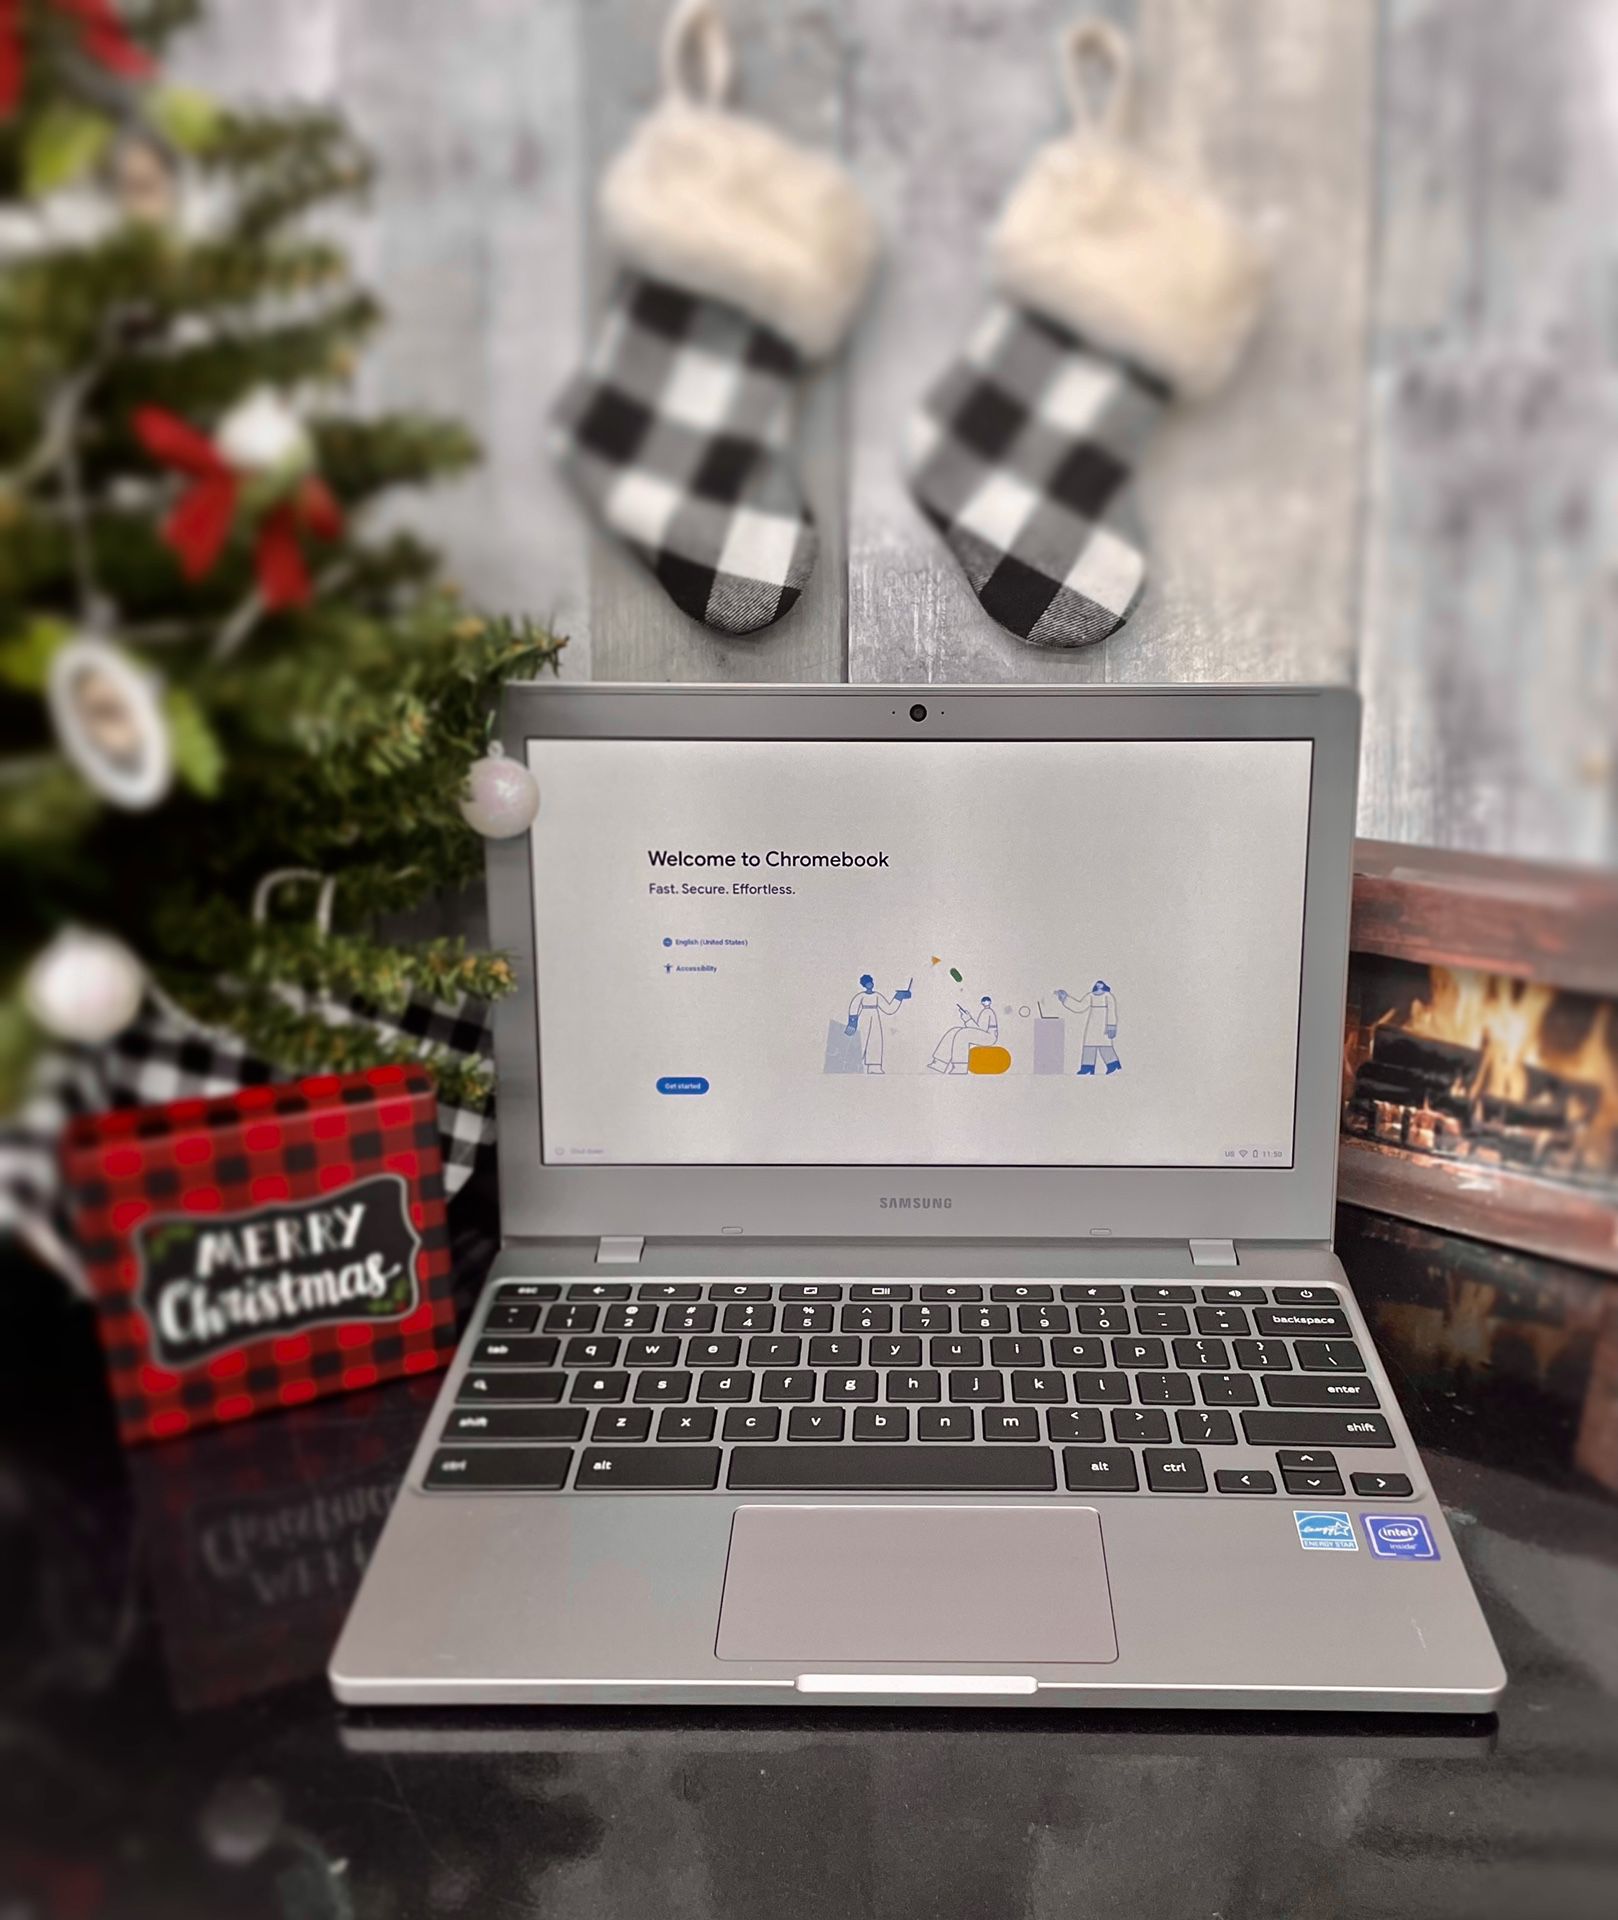 Samsung Chromebook 4 11.6” (will take payments)